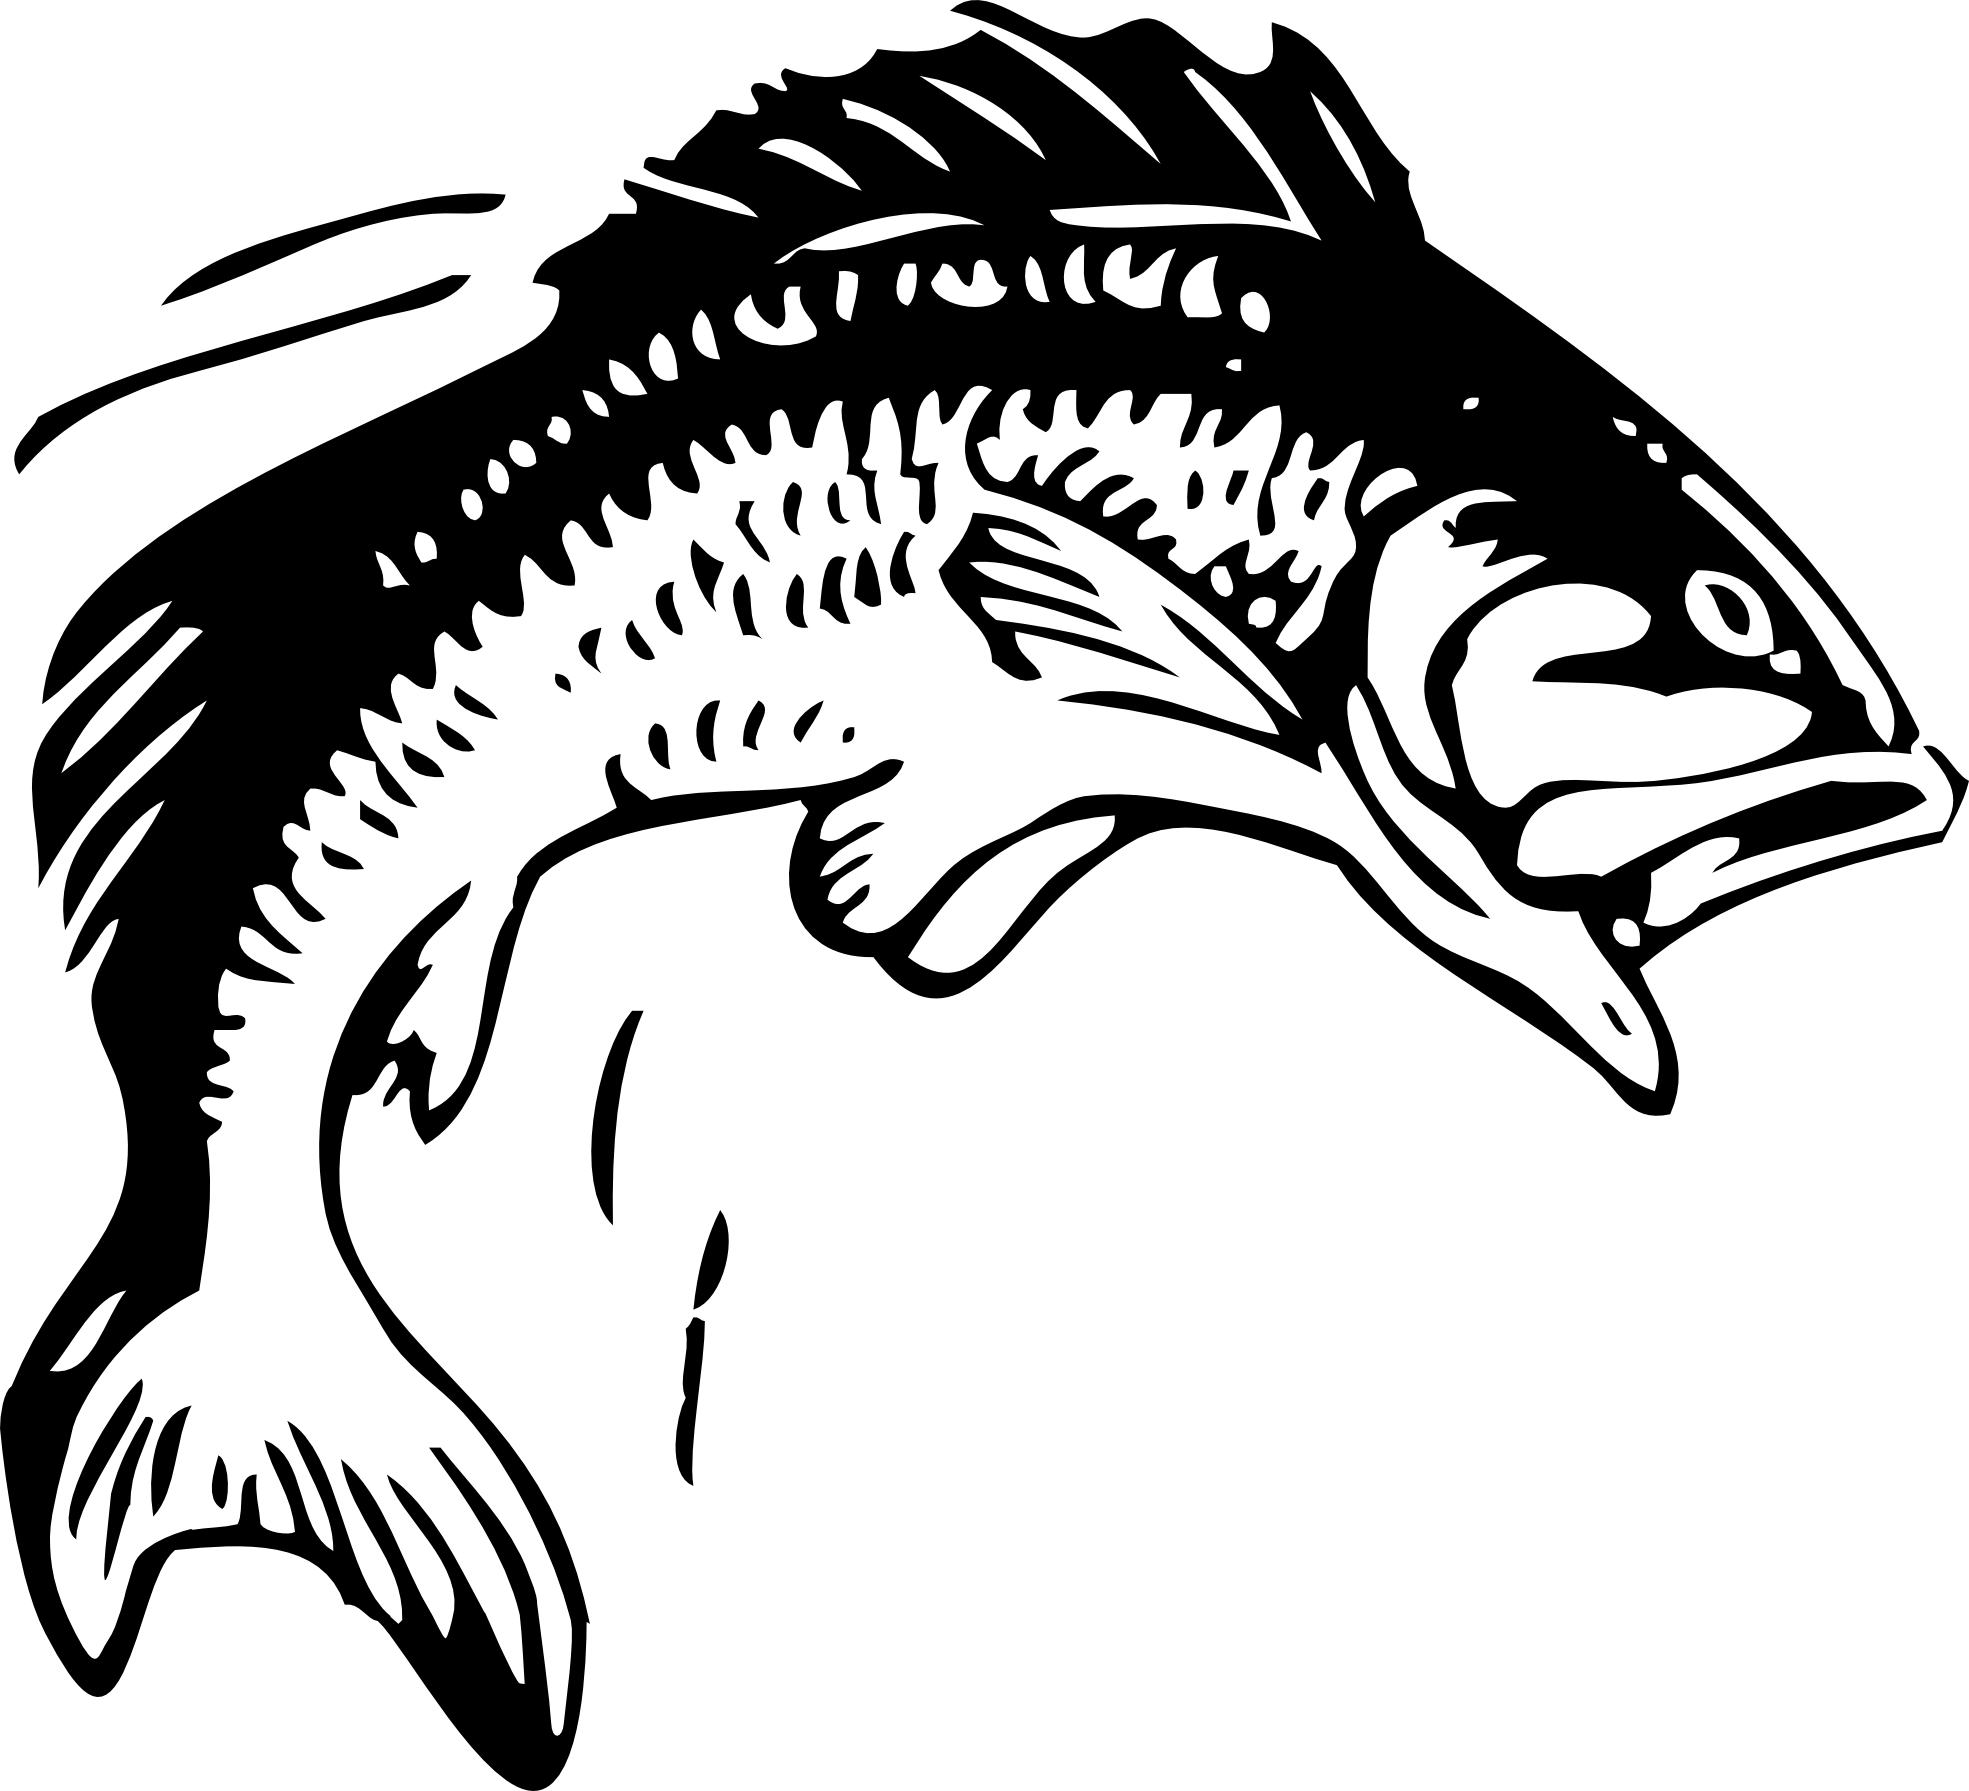 Trout black and white fish clipart